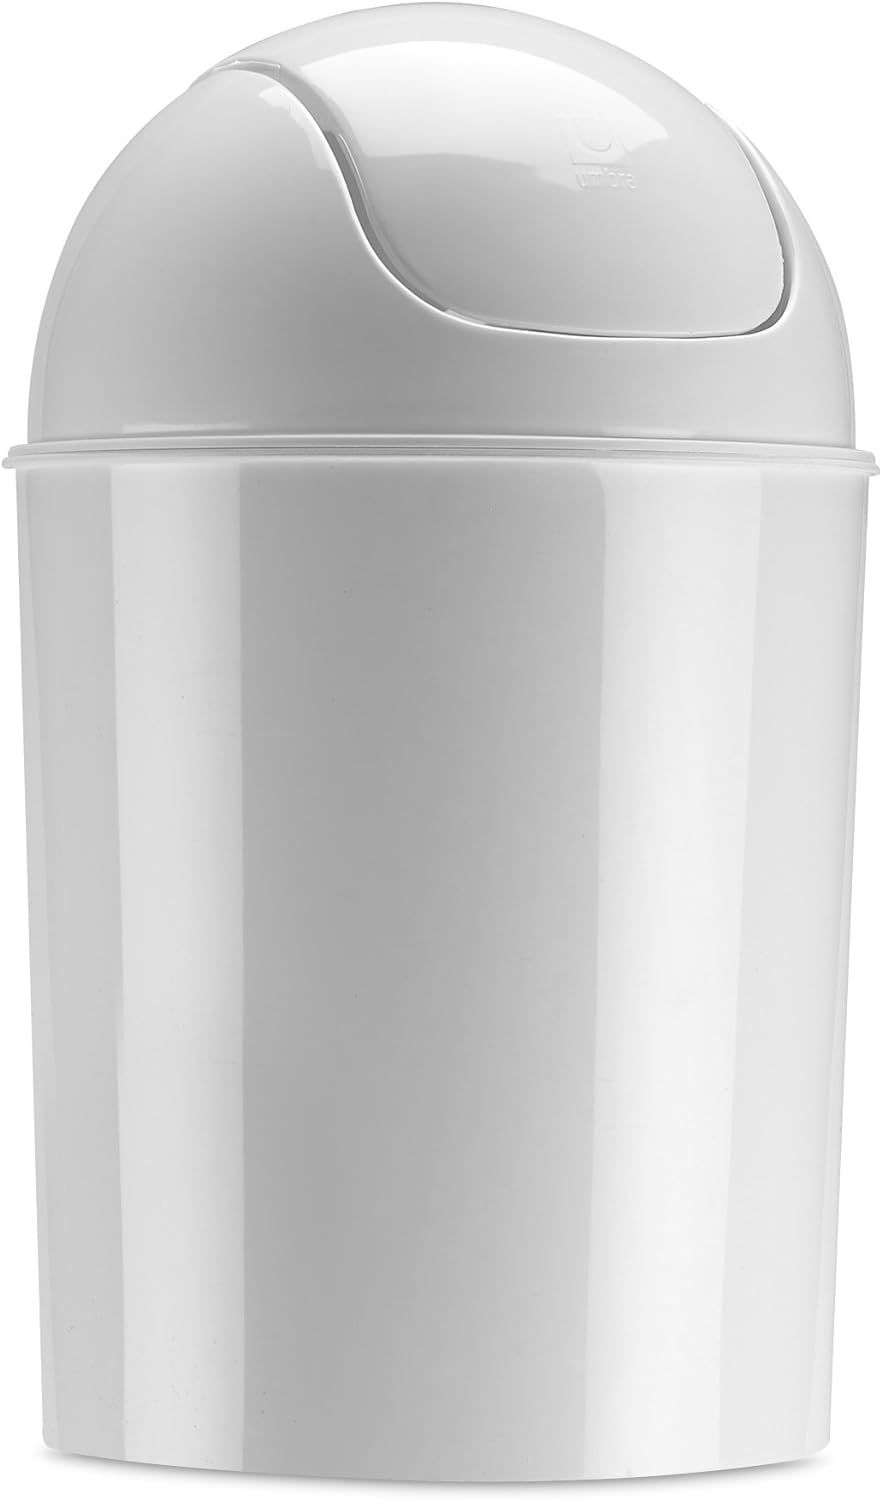 Umbra Mini Waste Can 1-1/2 Gallon with Swing Lid, White | Amazon (US)